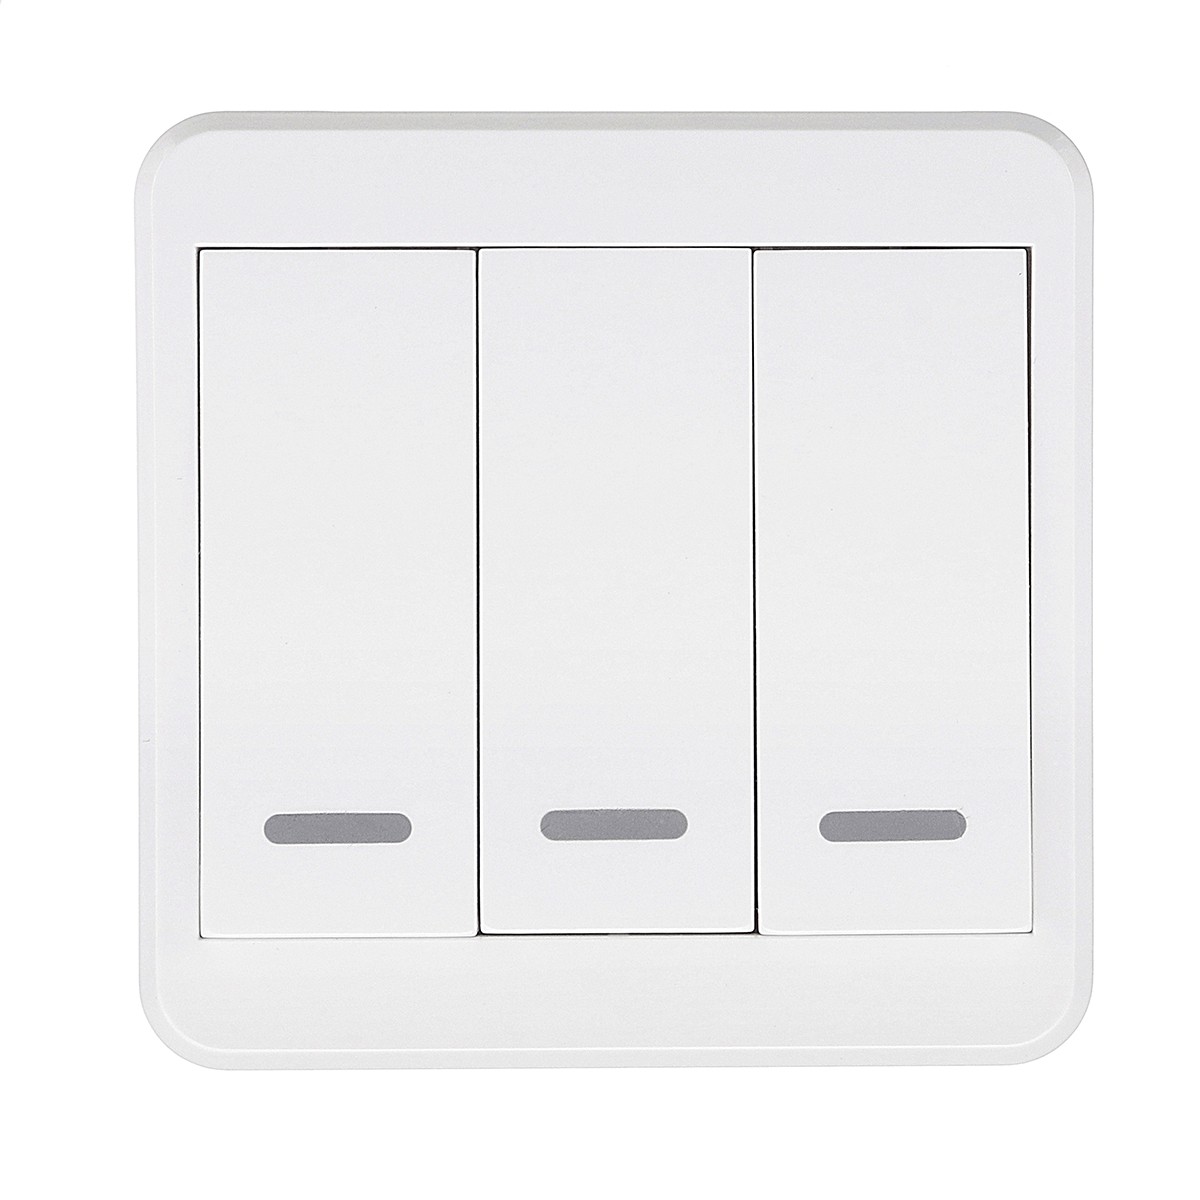 123-Way-Push-Button-Switch-Remote-Control-Switch-86-Wall-Panel-315MHz-Wireless-1334553-7